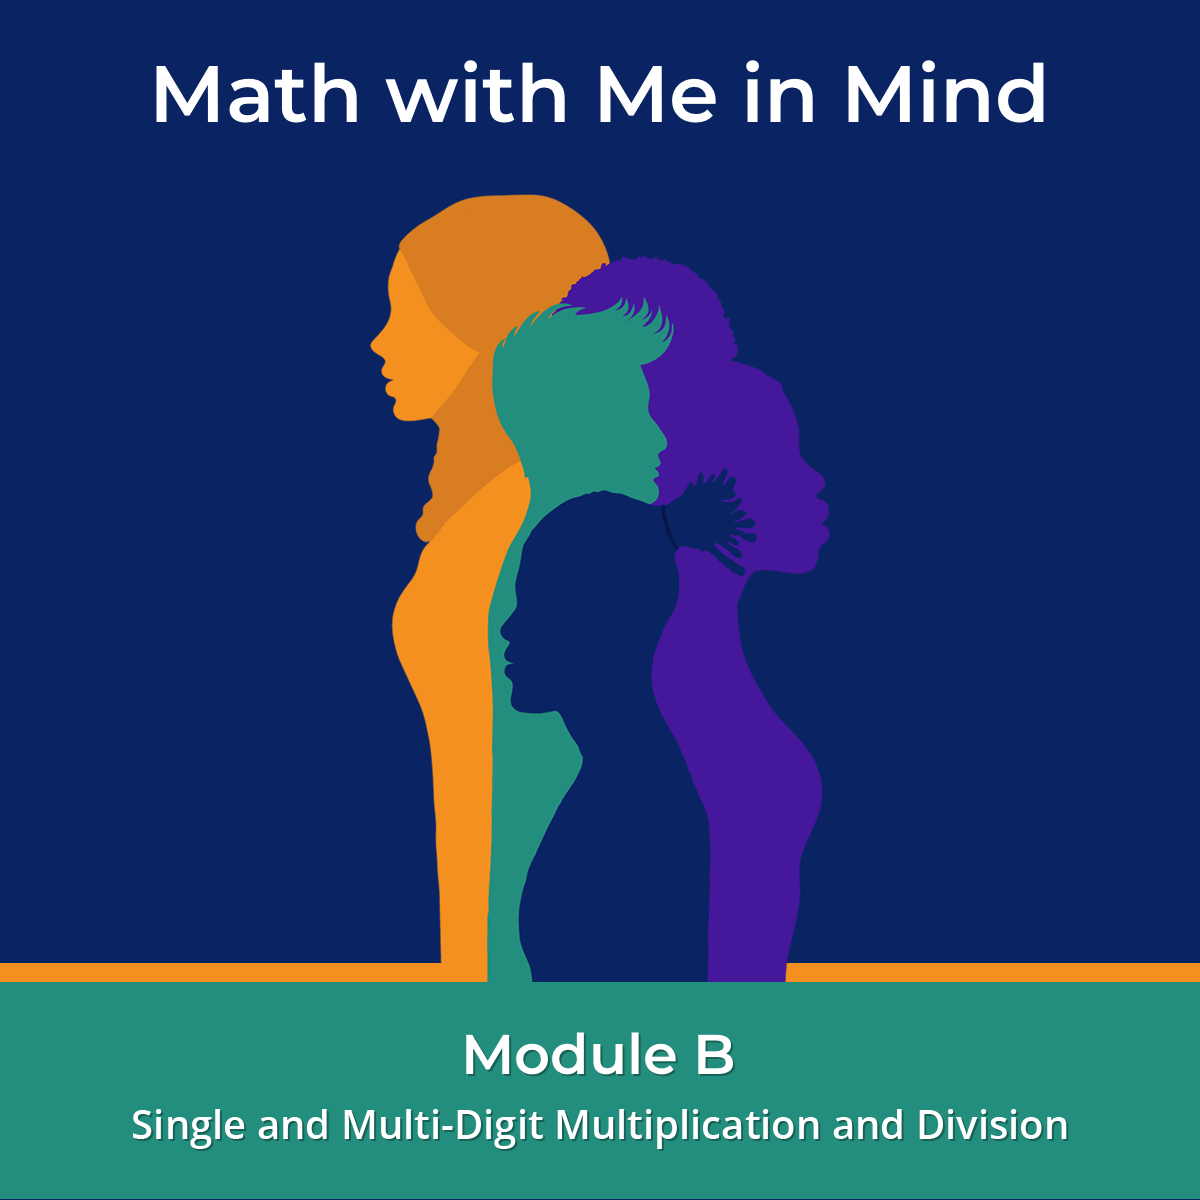 Math with Me in Mind Module B: Single and Multi-Digit Multiplication and Division